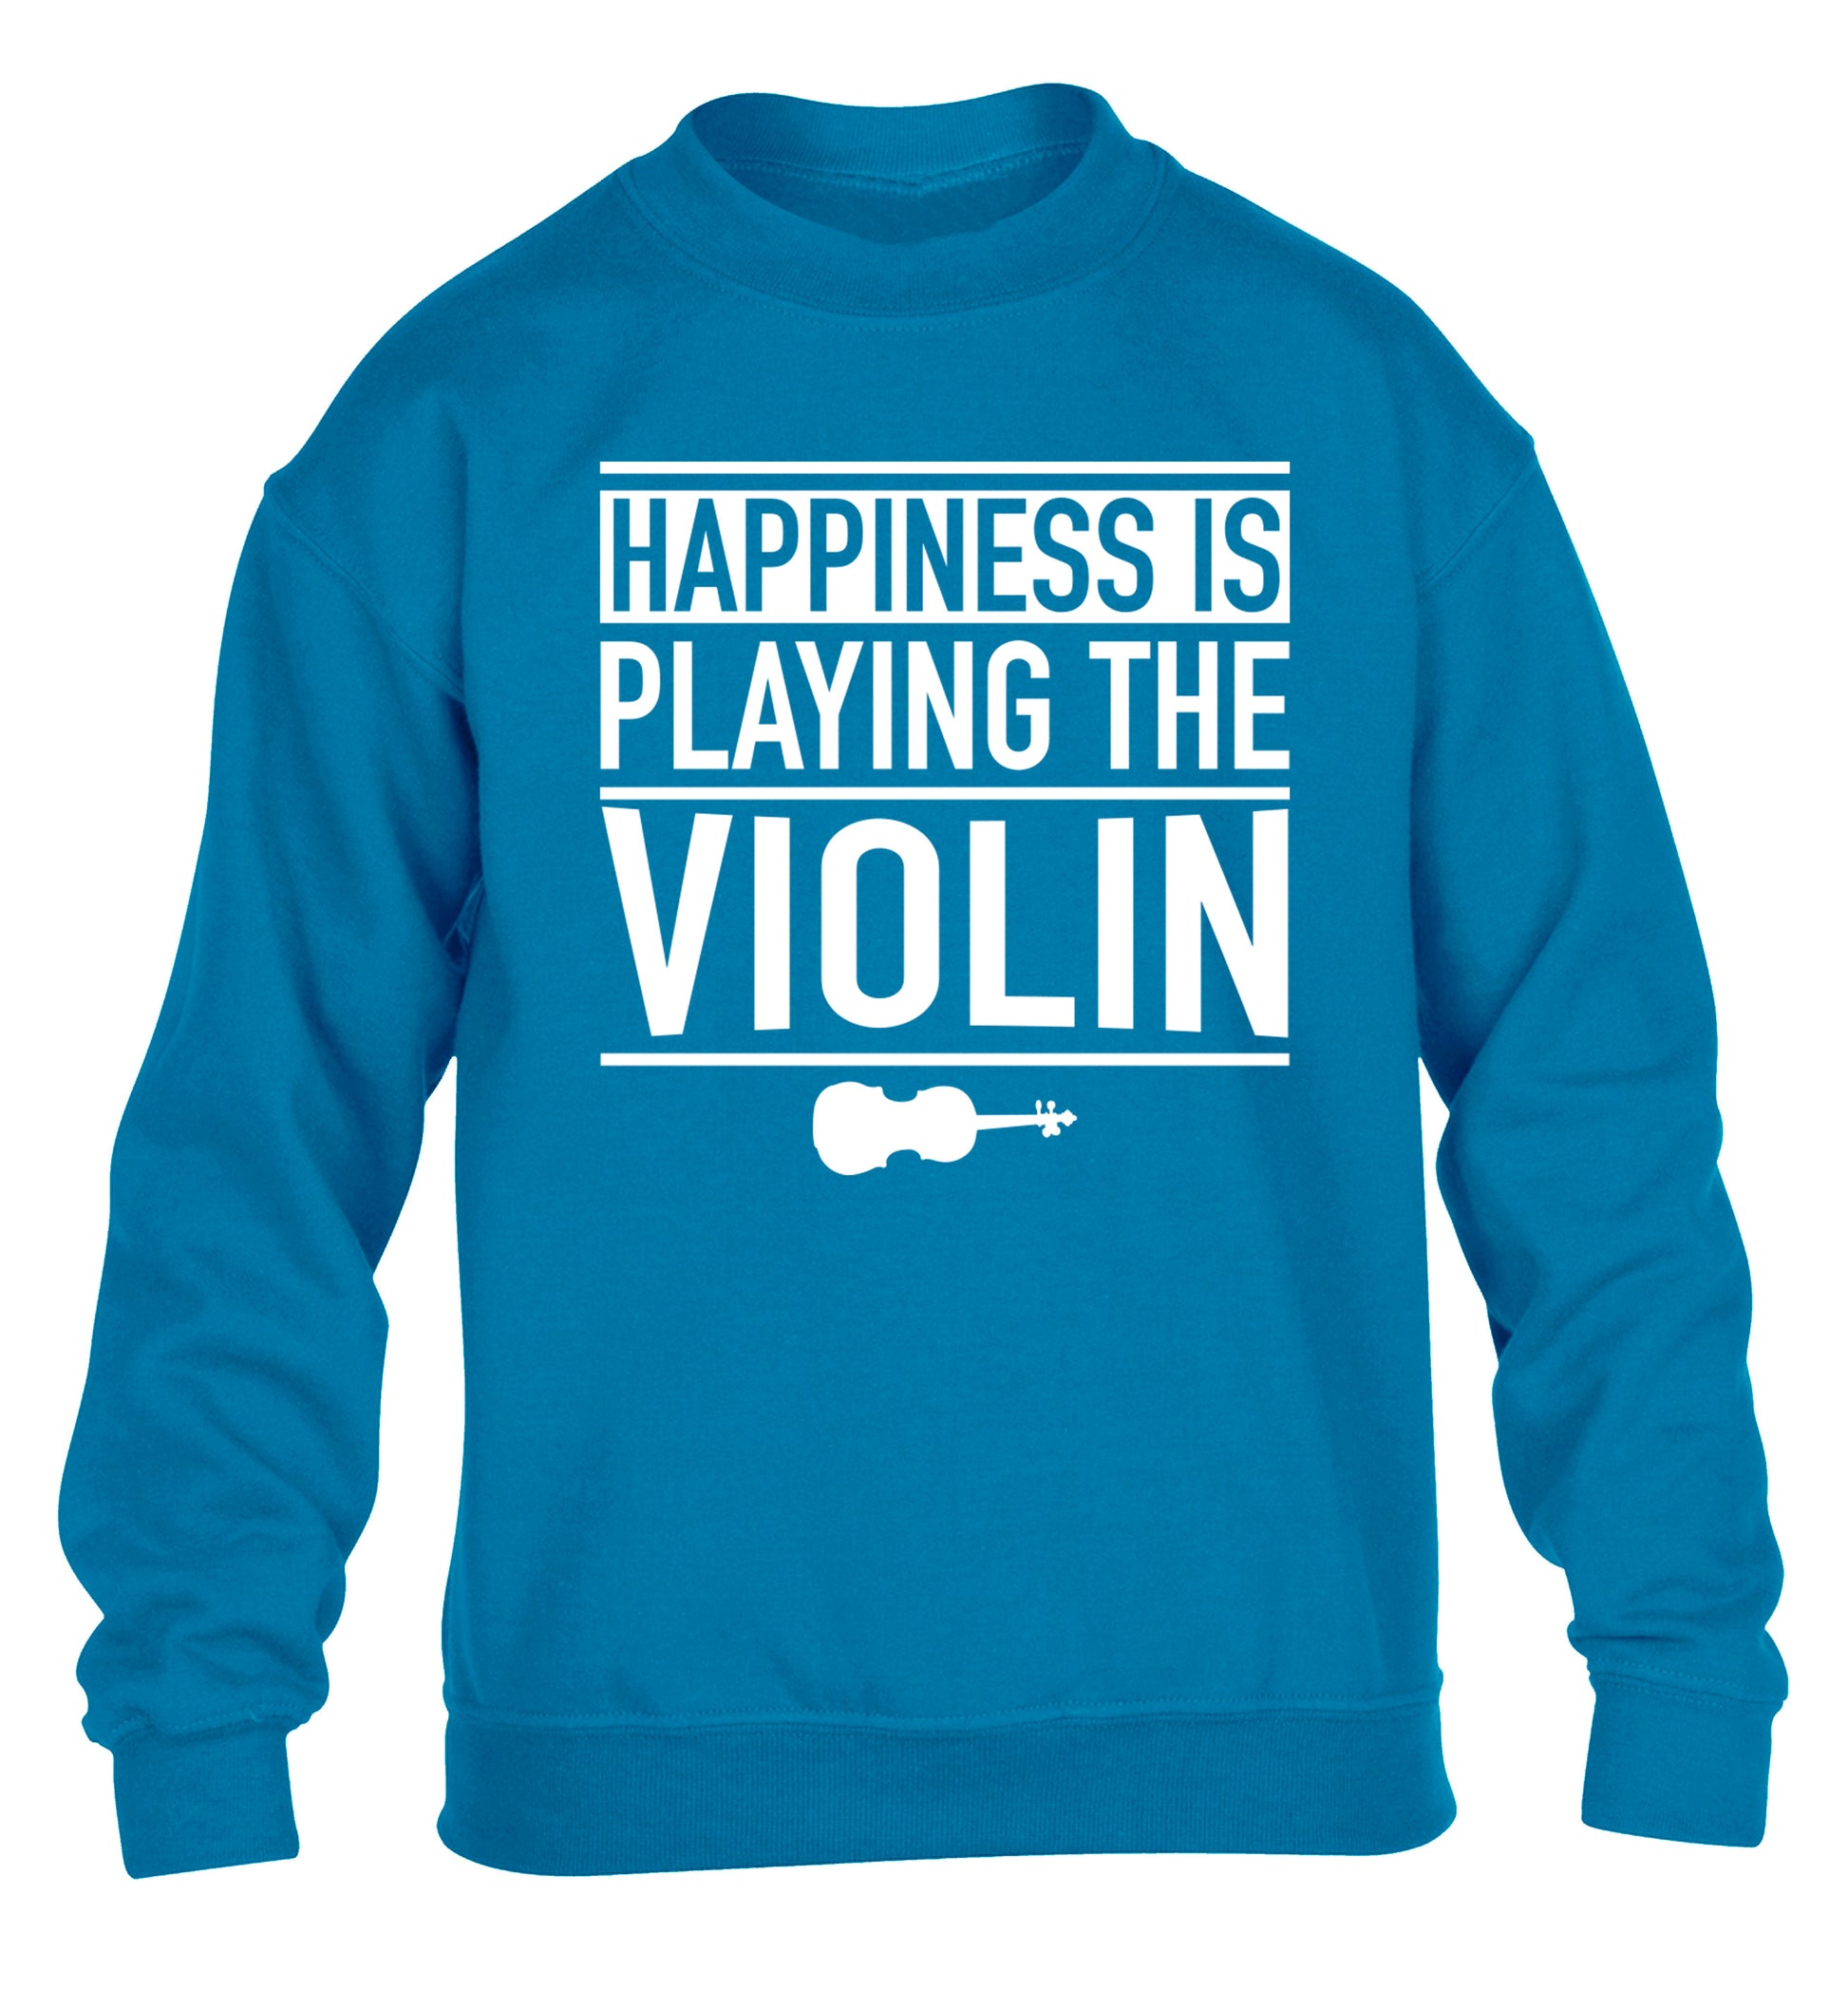 Happiness is playing the violin children's blue sweater 12-13 Years